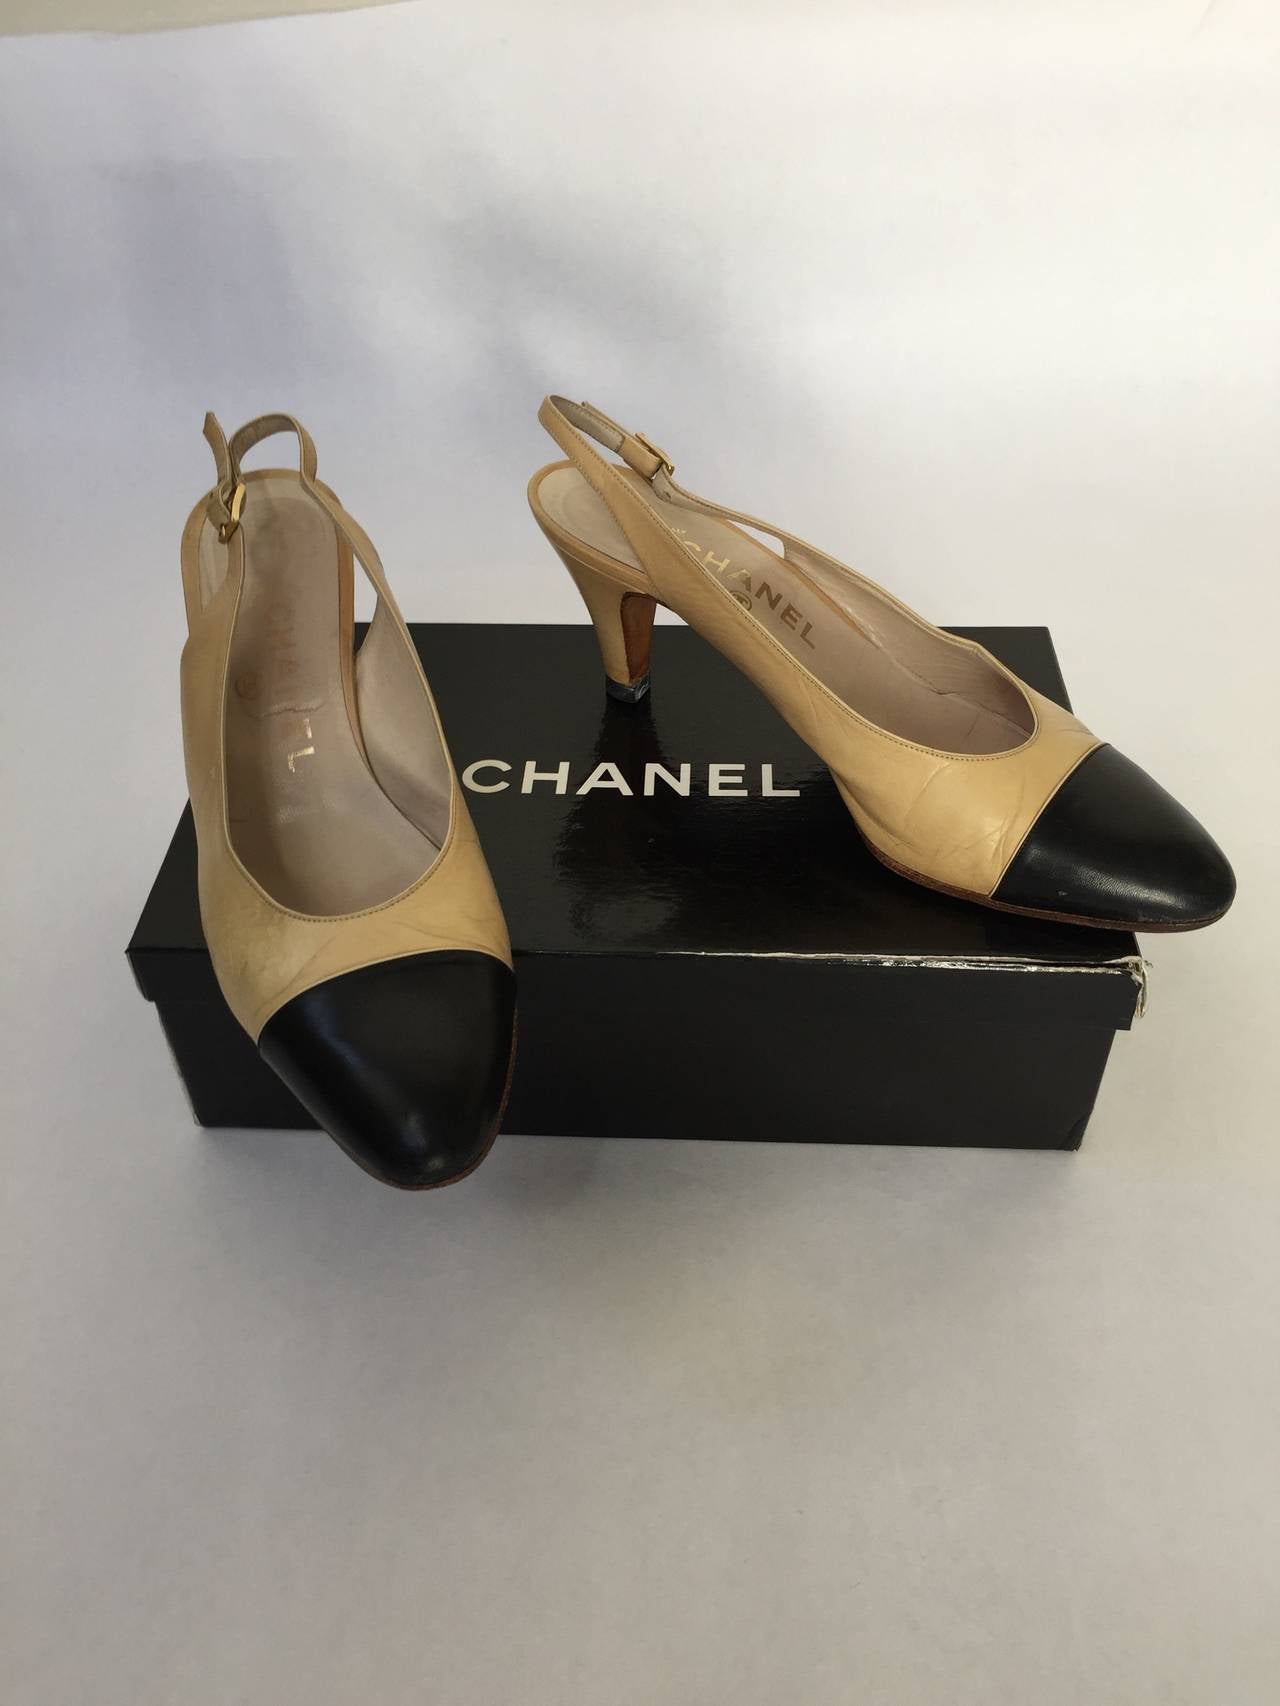 Chanel 1971 classic sling back shoes size 6.5 For Sale 3